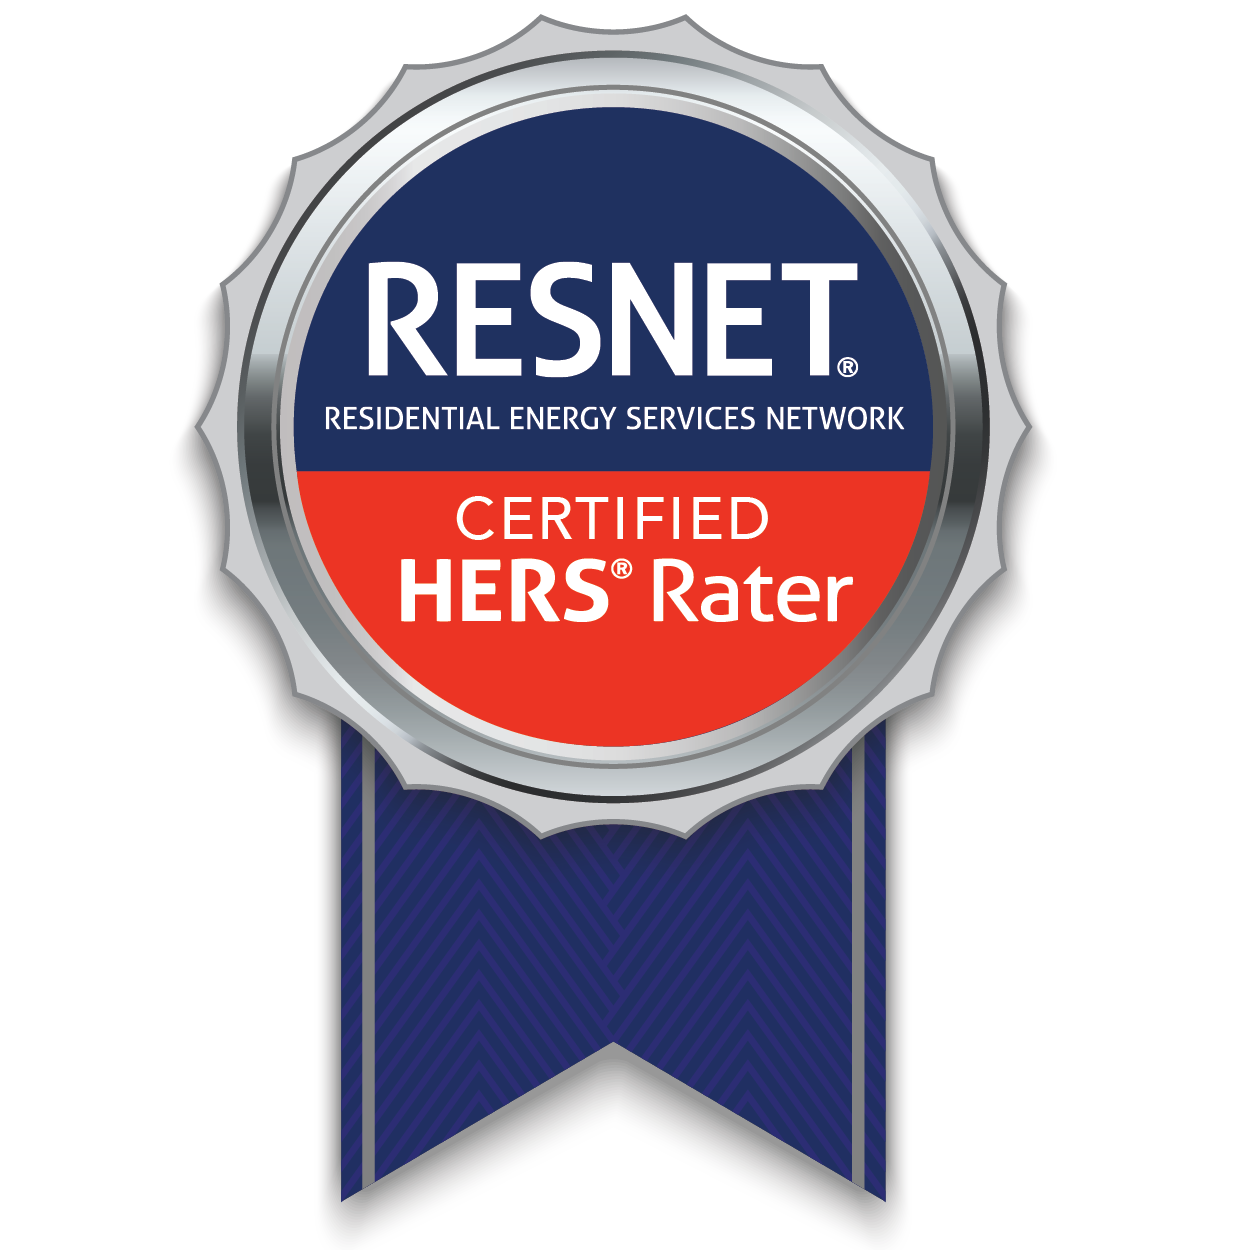 Certified Home Energy Rater